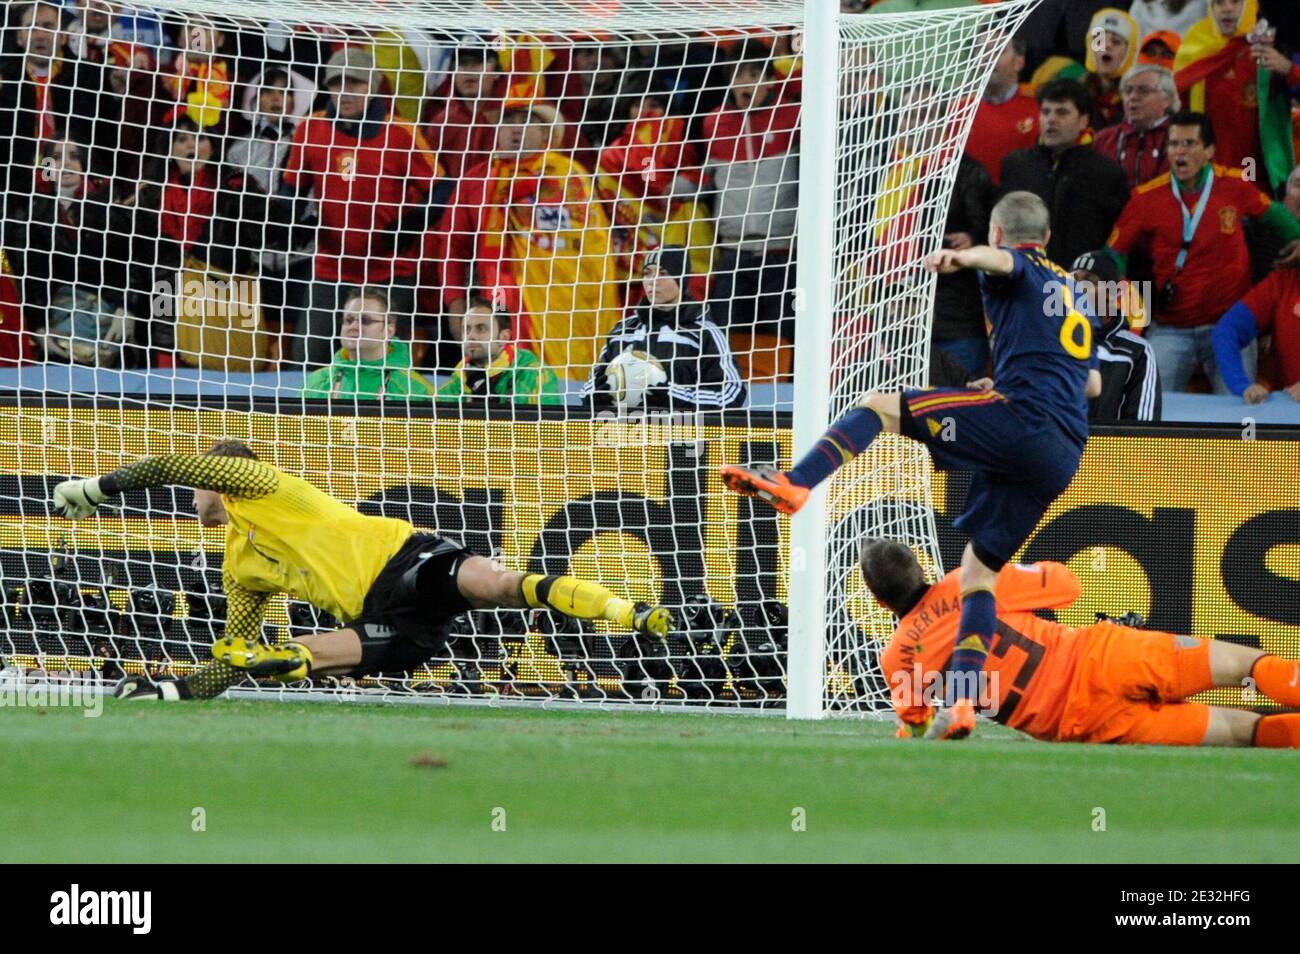 Spain's Andres Iniesta scoring the 1-0 goal in the 2010 FIFA World Cup South Africa Final Soccer match, Spain vs Netherlands at Soccer City football stadium in Johannesburg, South Africa on July 11th, 2010. Spain won 1-0. Photo by Henri Szwarc/ABACAPRESS.COM Stock Photo